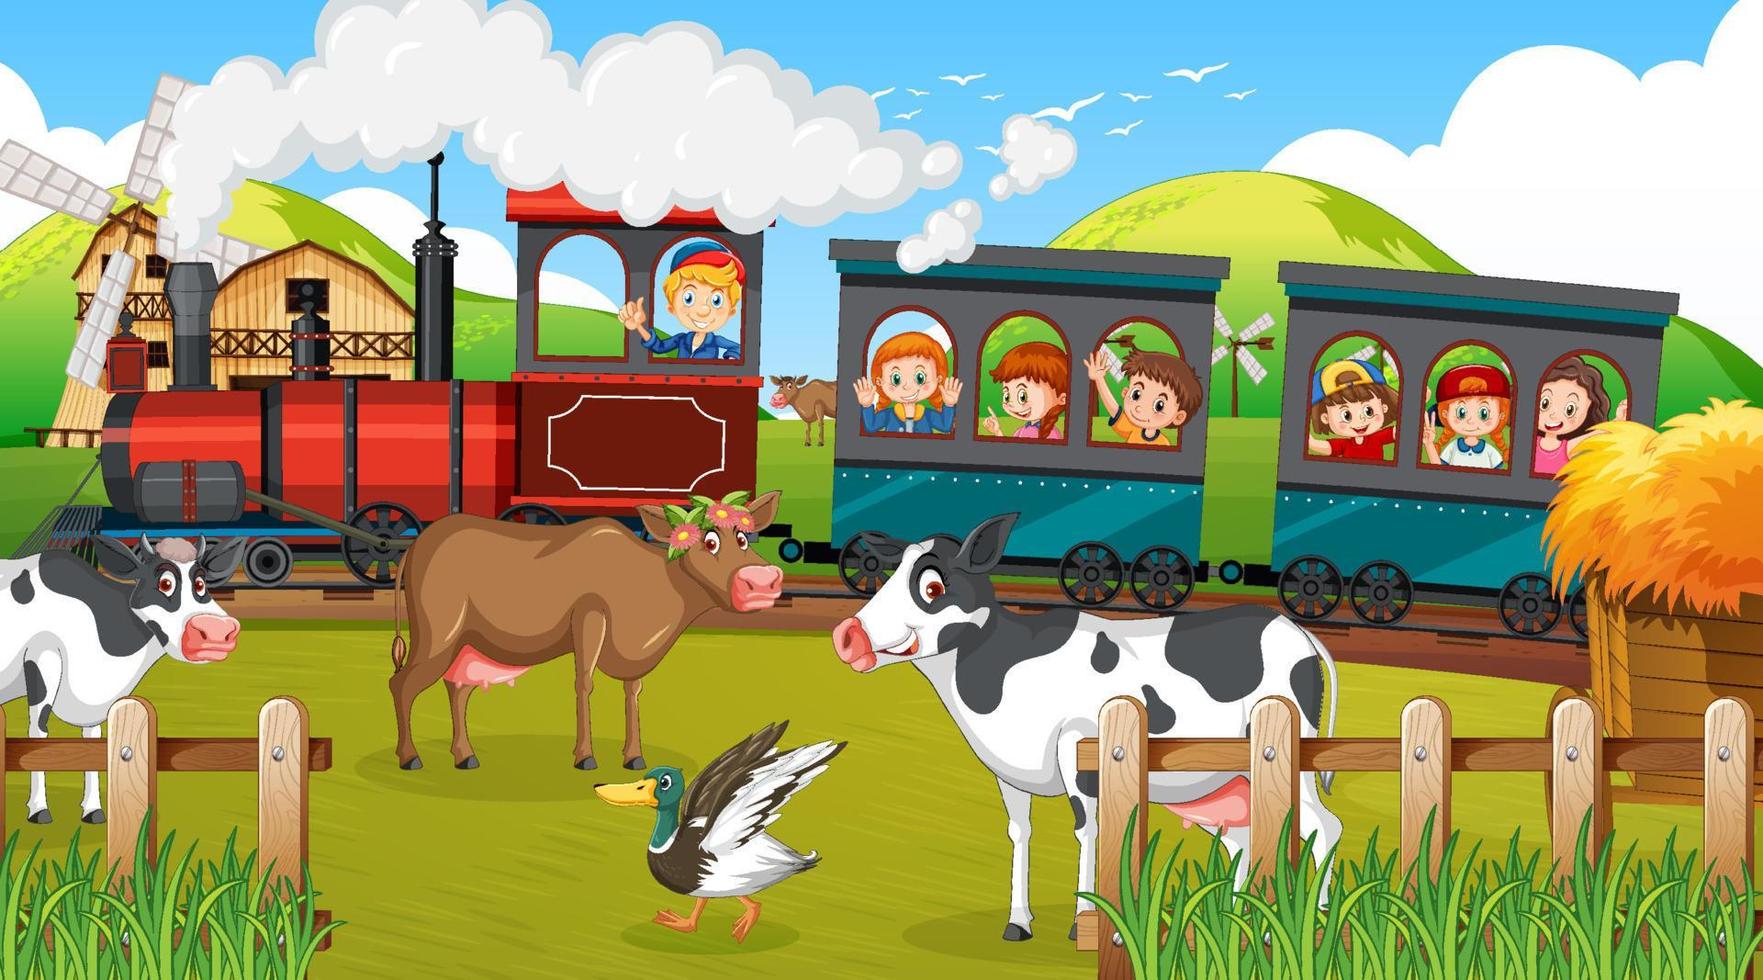 Train riding with children in the countryside vector